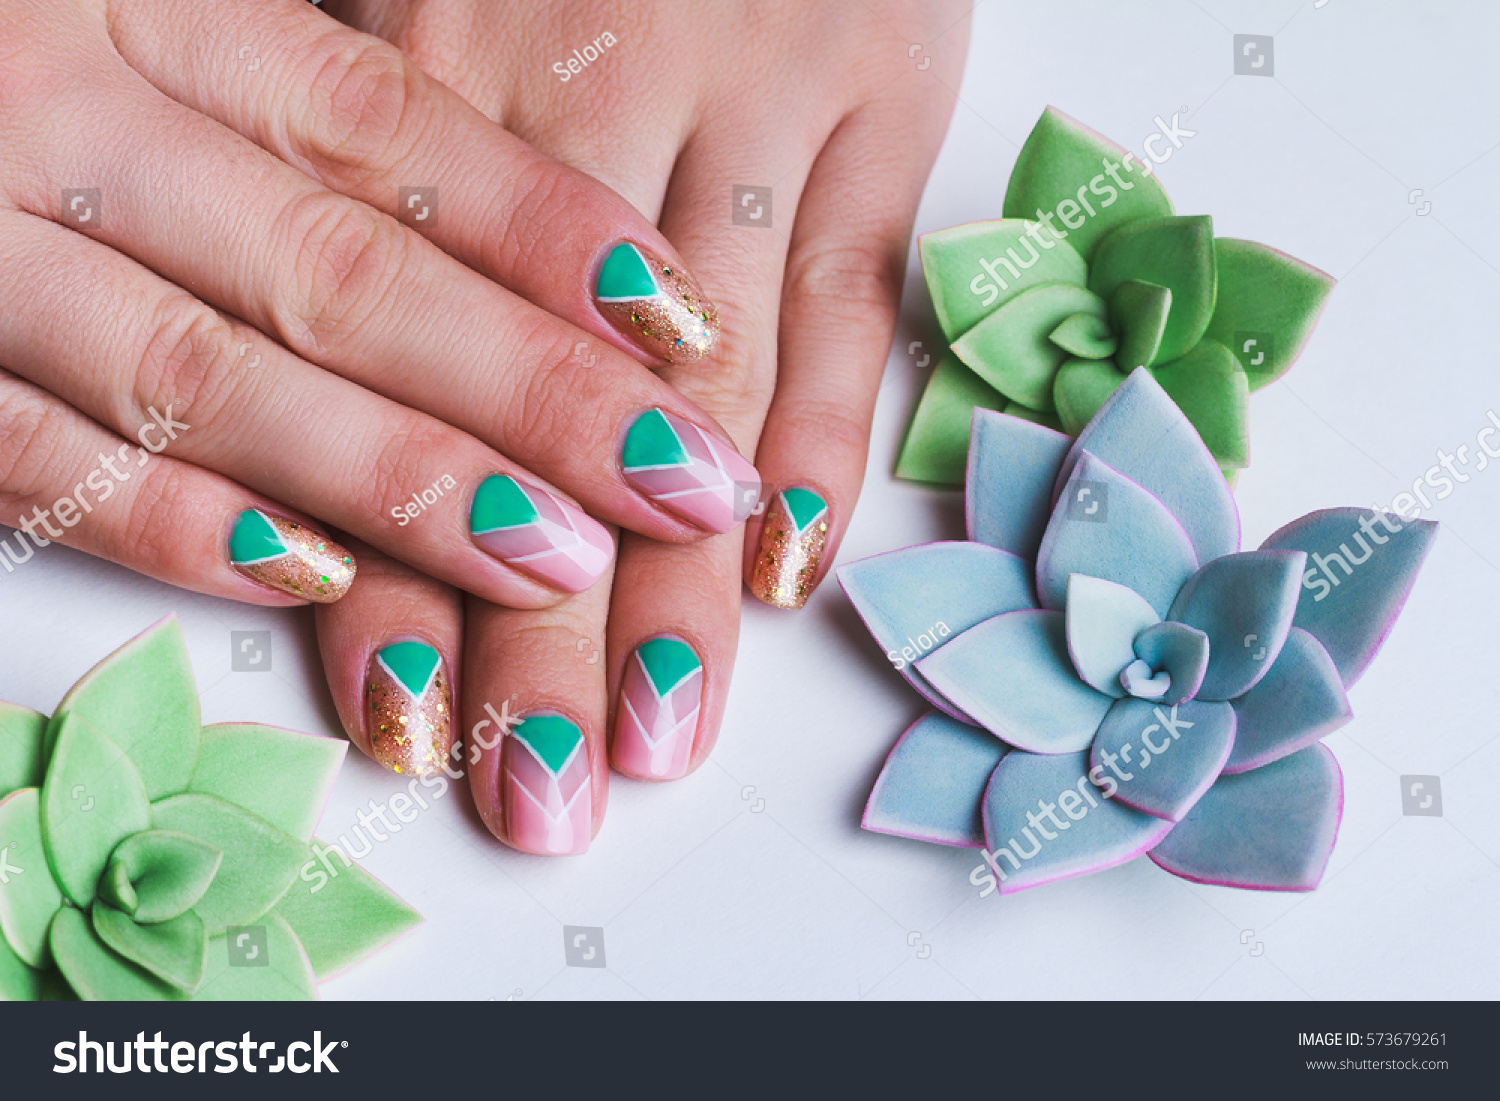 Nail art with bright gold, pink and green chevron pattern on light background #573679261